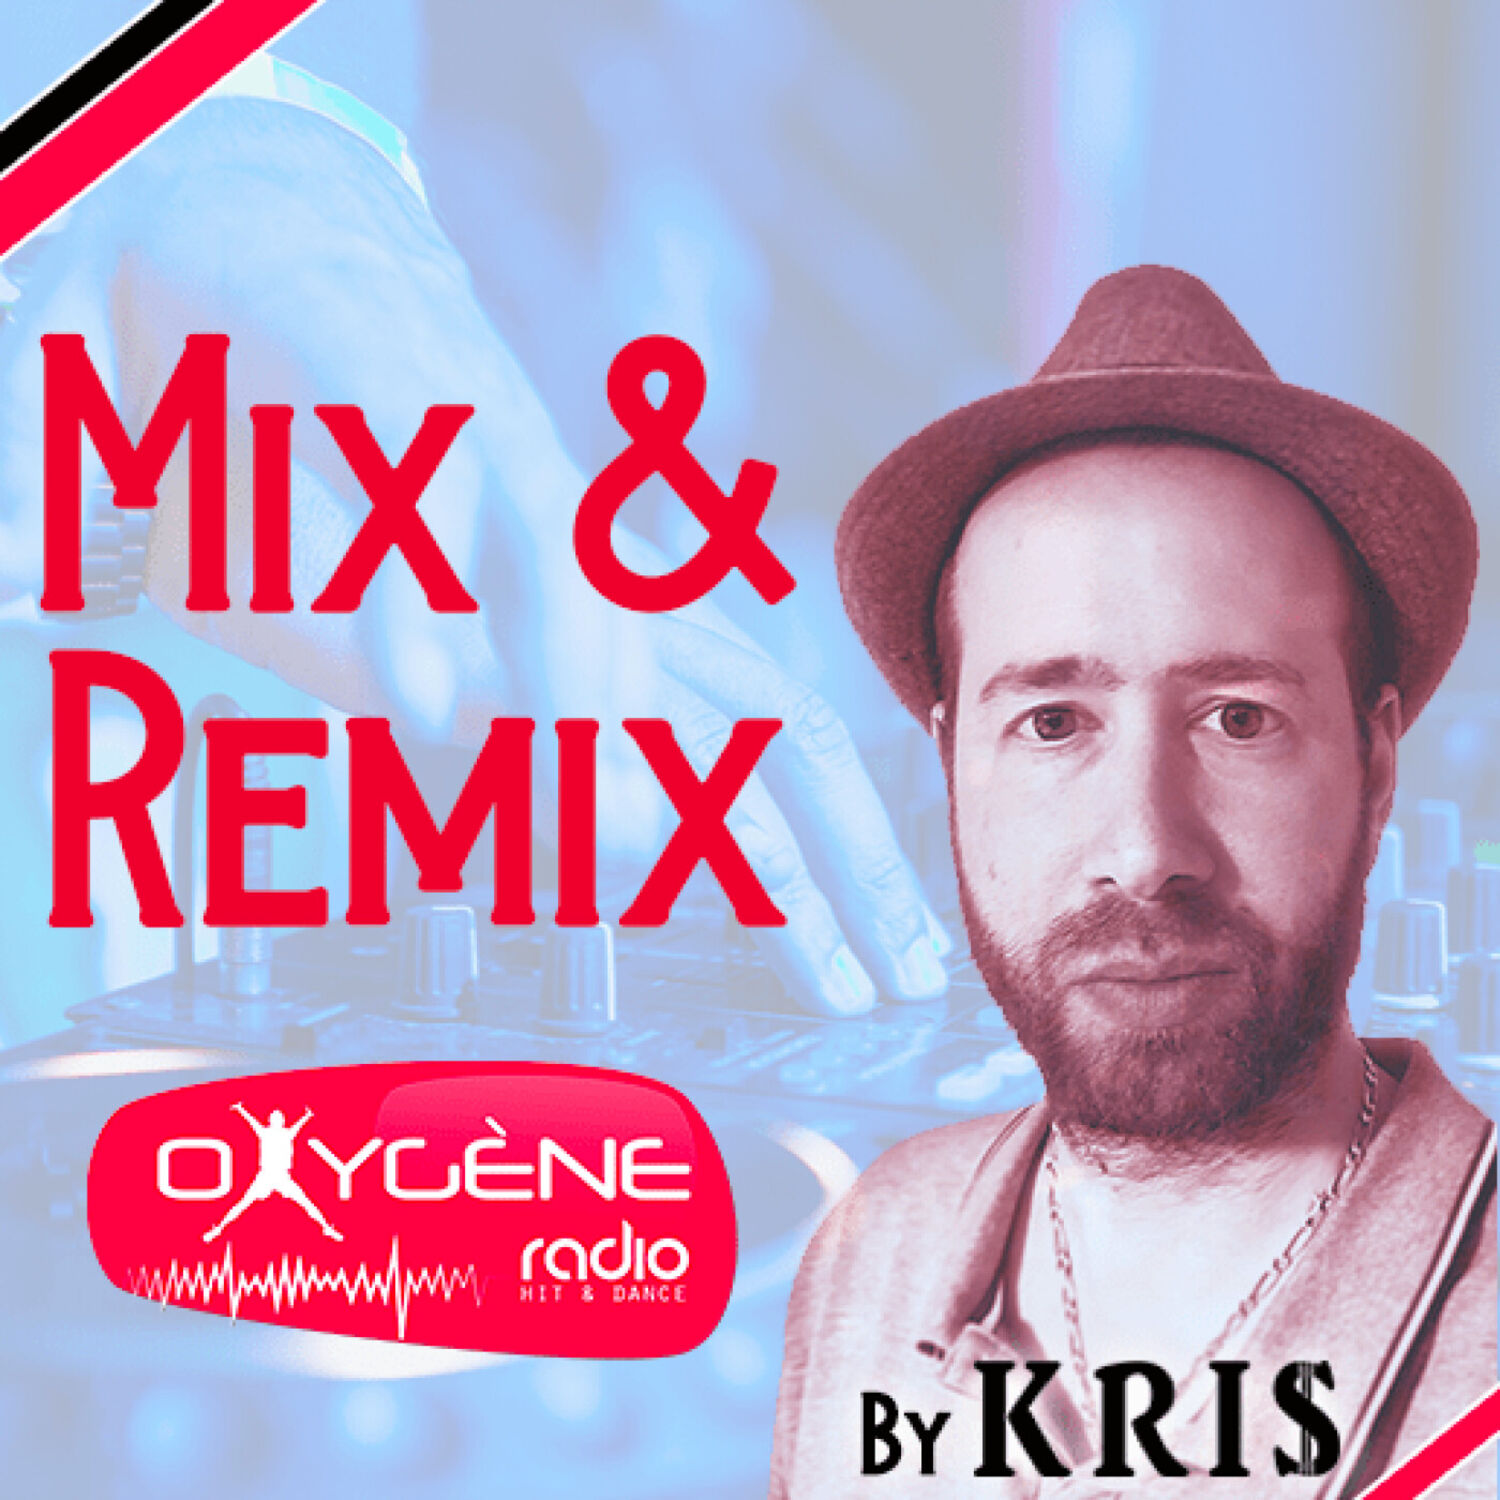 Hits remixs (Low Tempo, Electro & Dubstep)